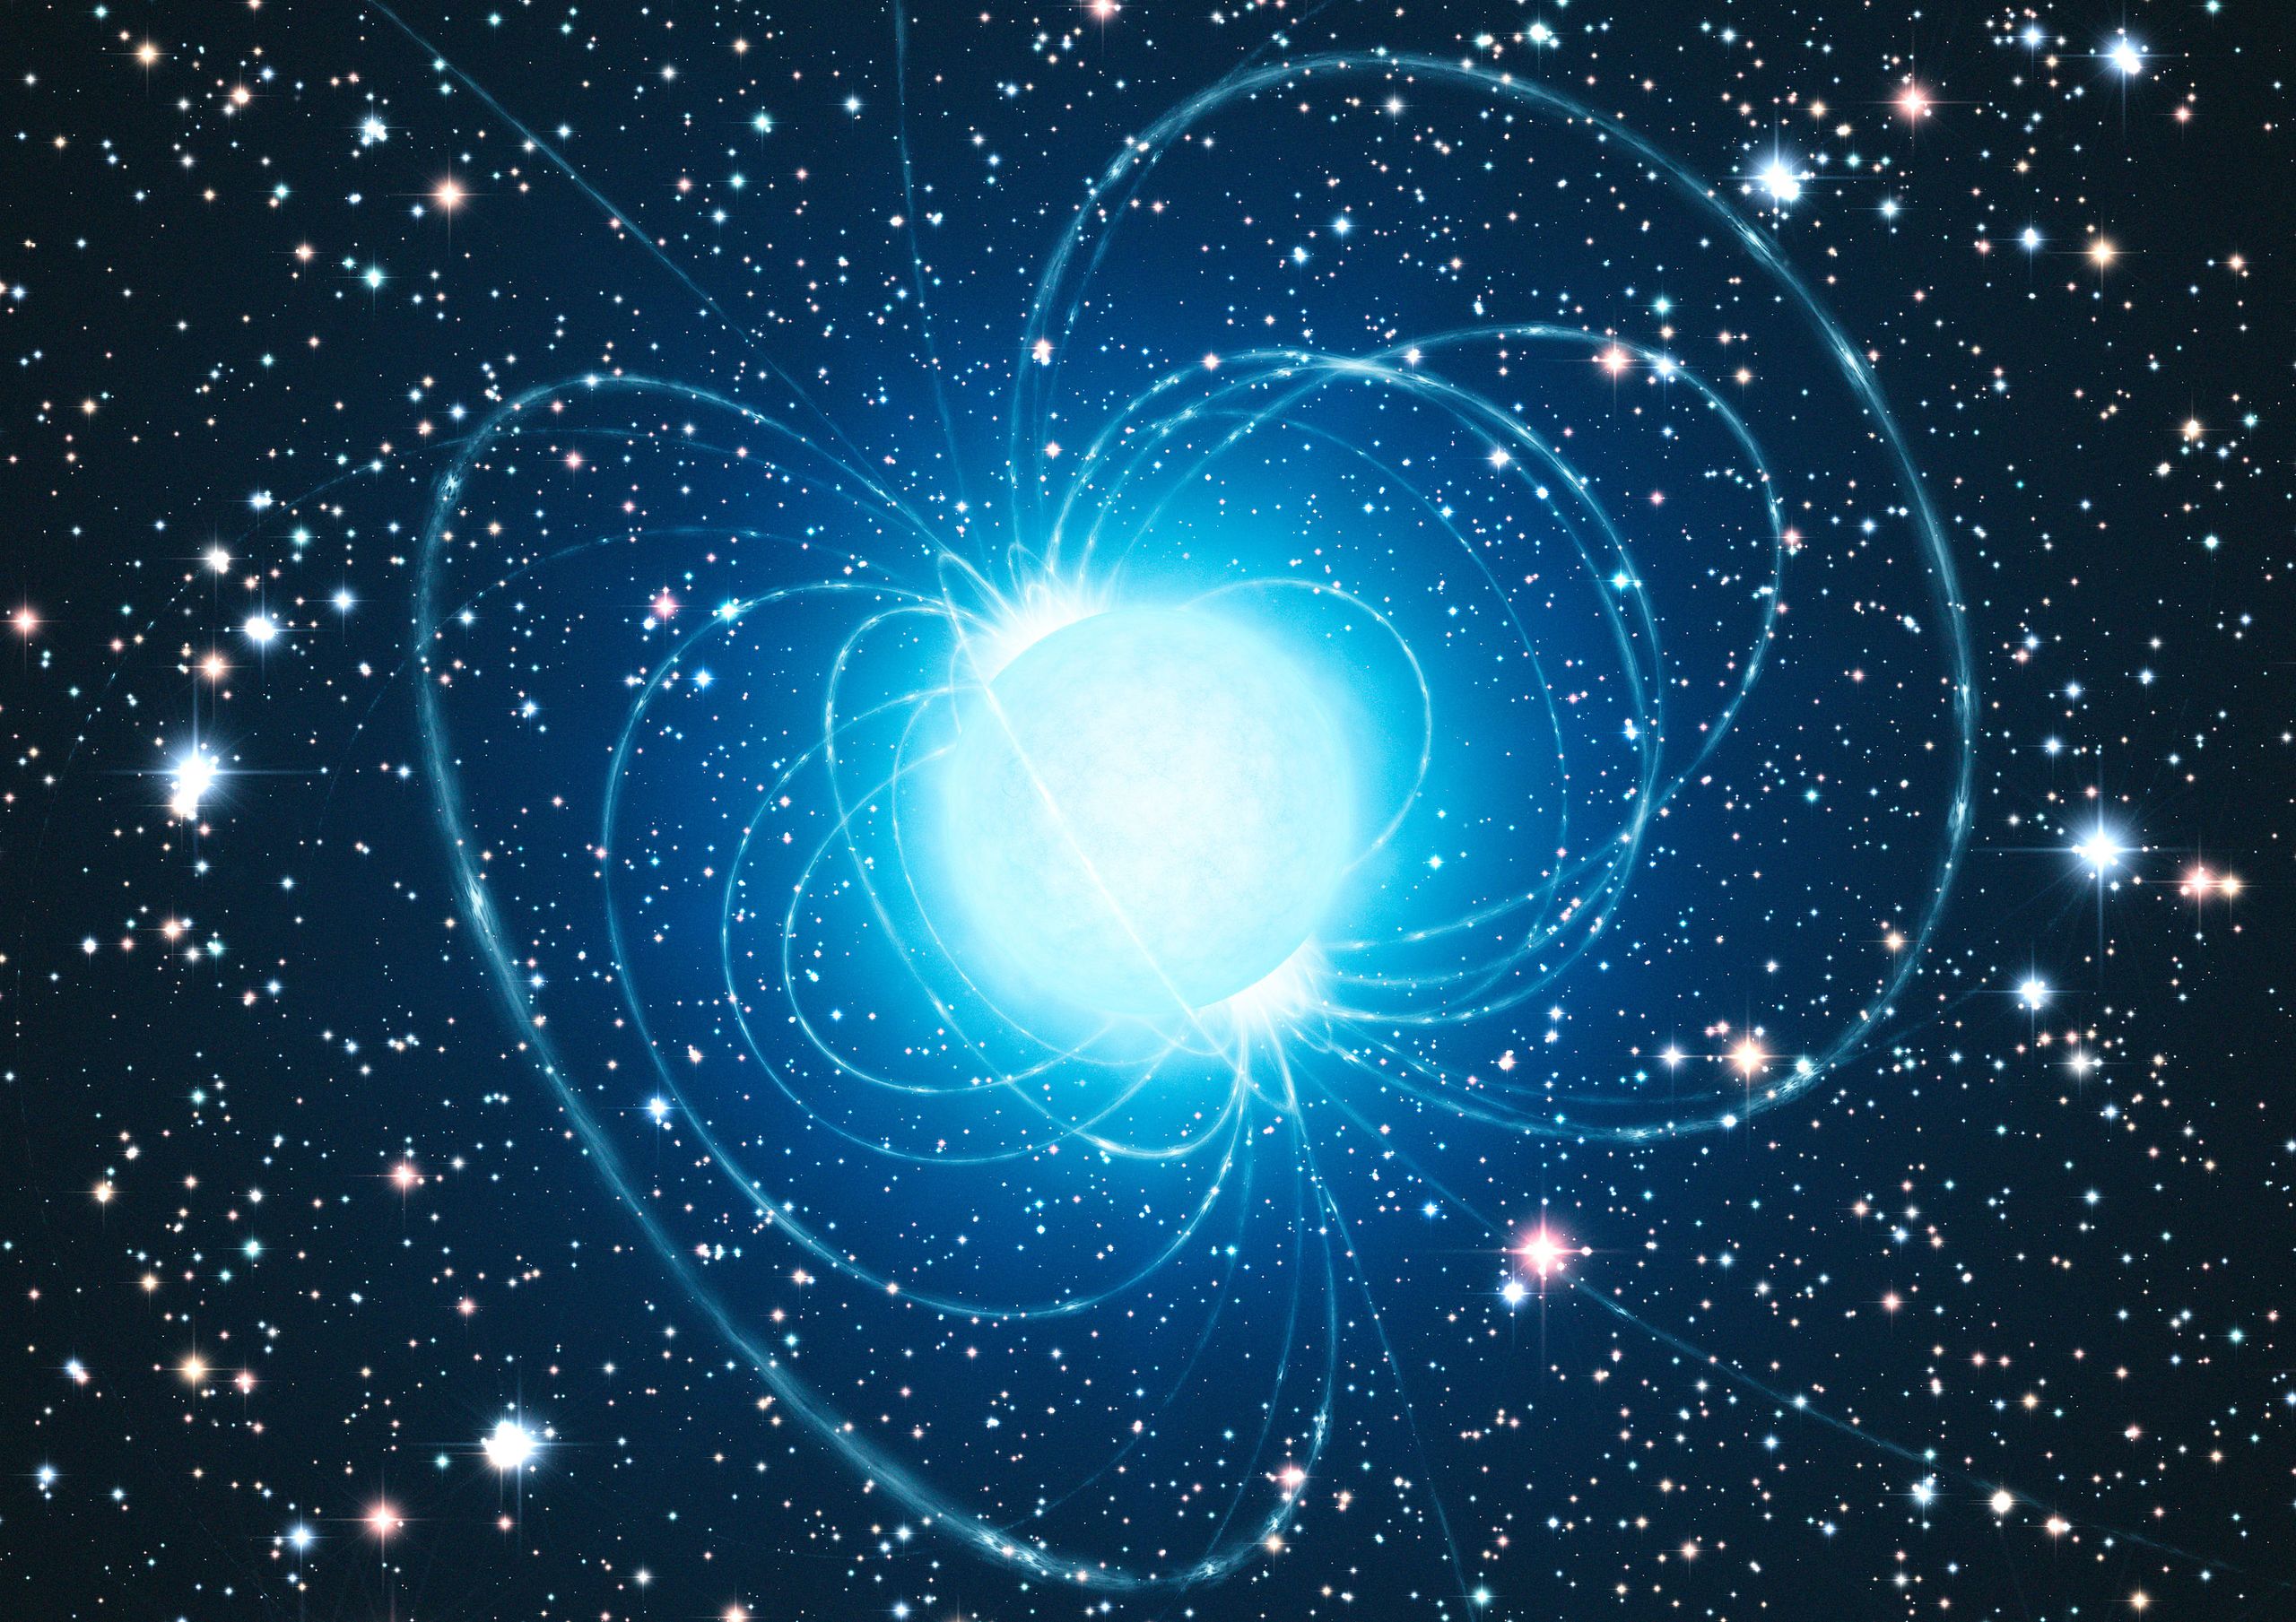 An example of a star’s magnetic field. This artist’s impression shows the magnetar in the very rich and young star cluster Westerlund credit: ESO/L. Calçada